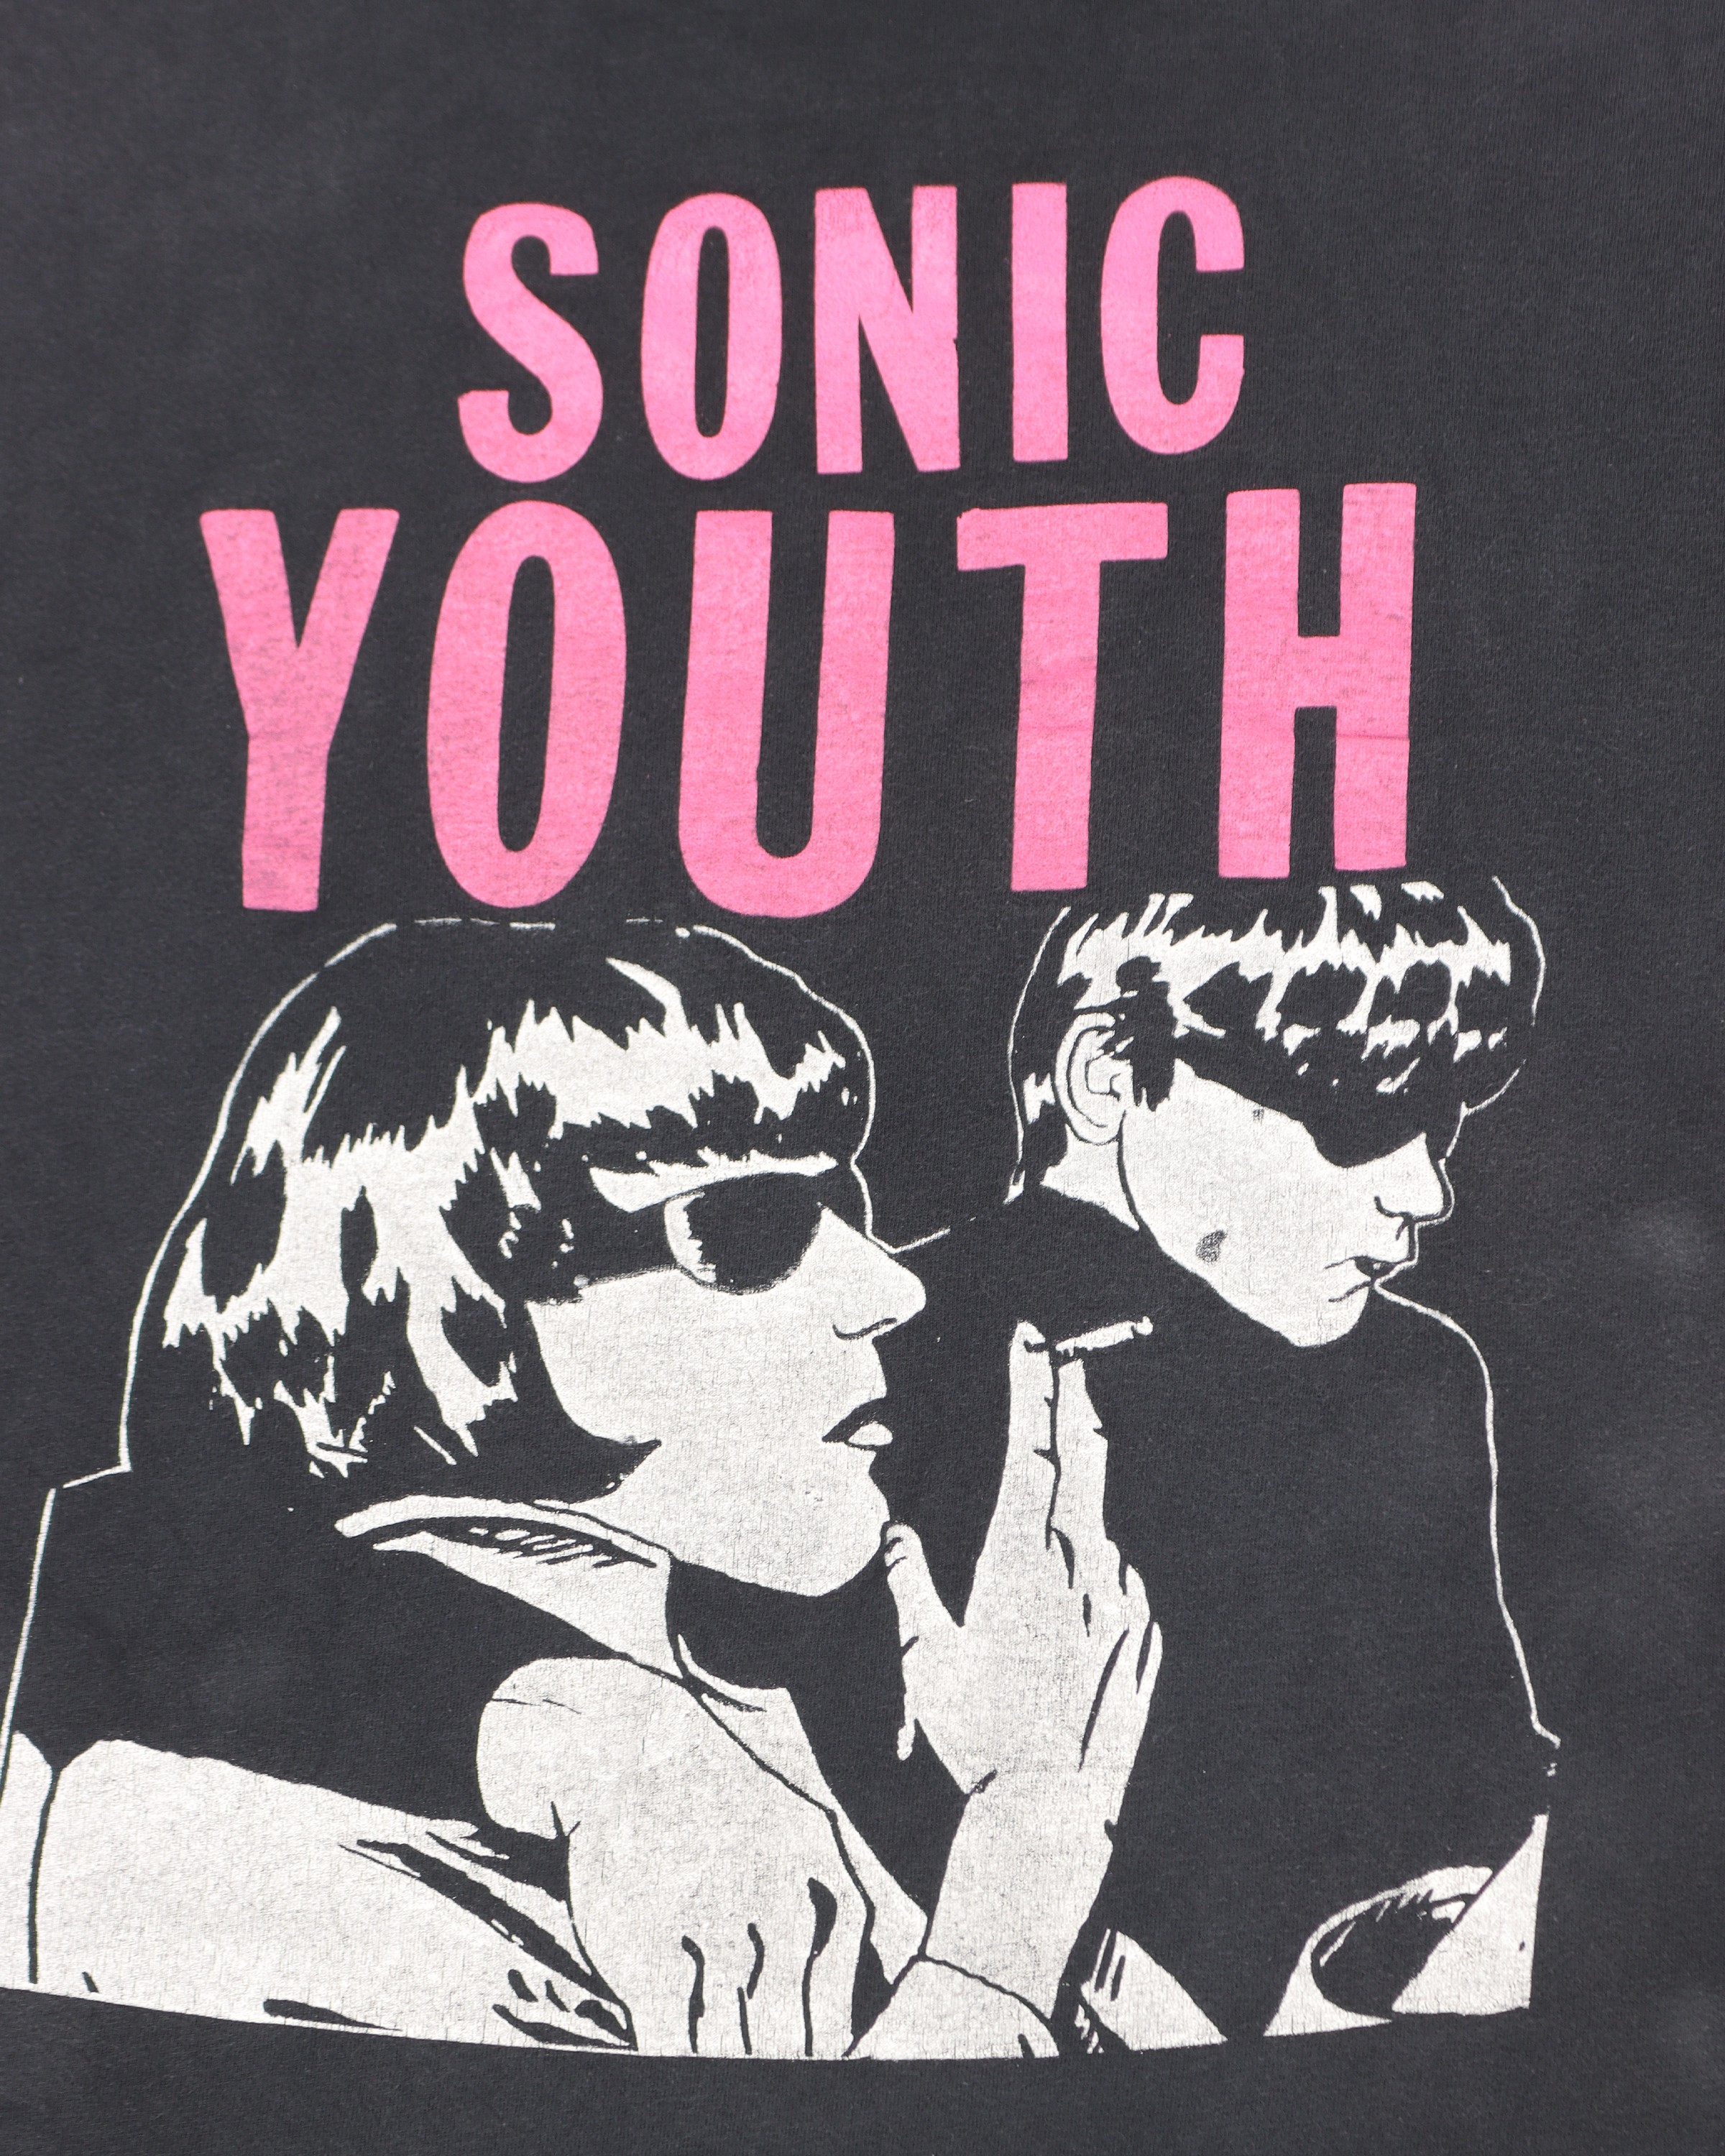 Sonic Youth Live T-Shirt